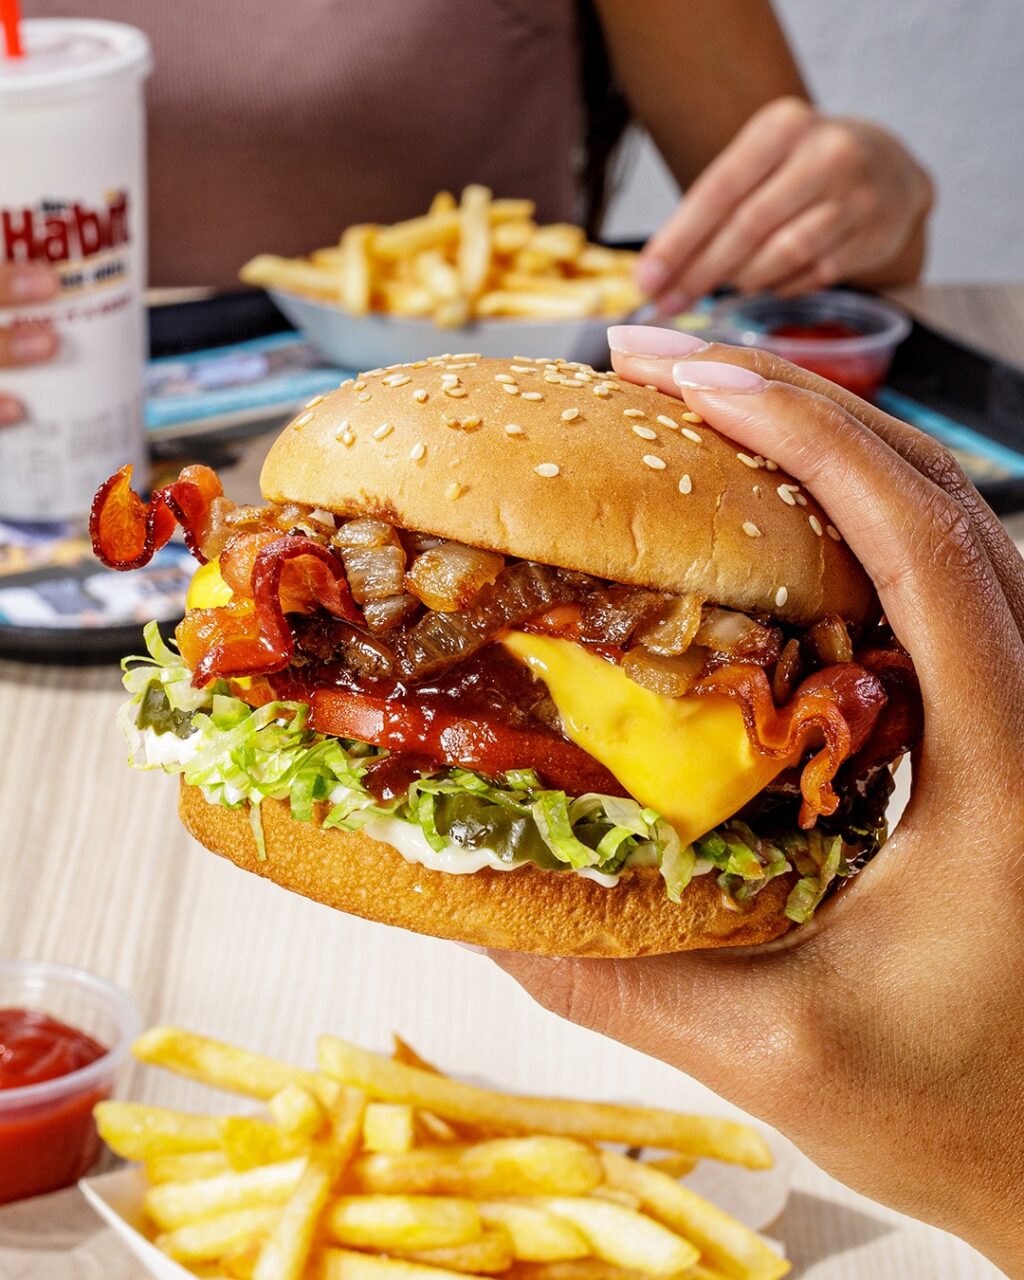 BBQ Bacon Char with Cheese from Habit Burger Grill. (Habit Burger Grill)